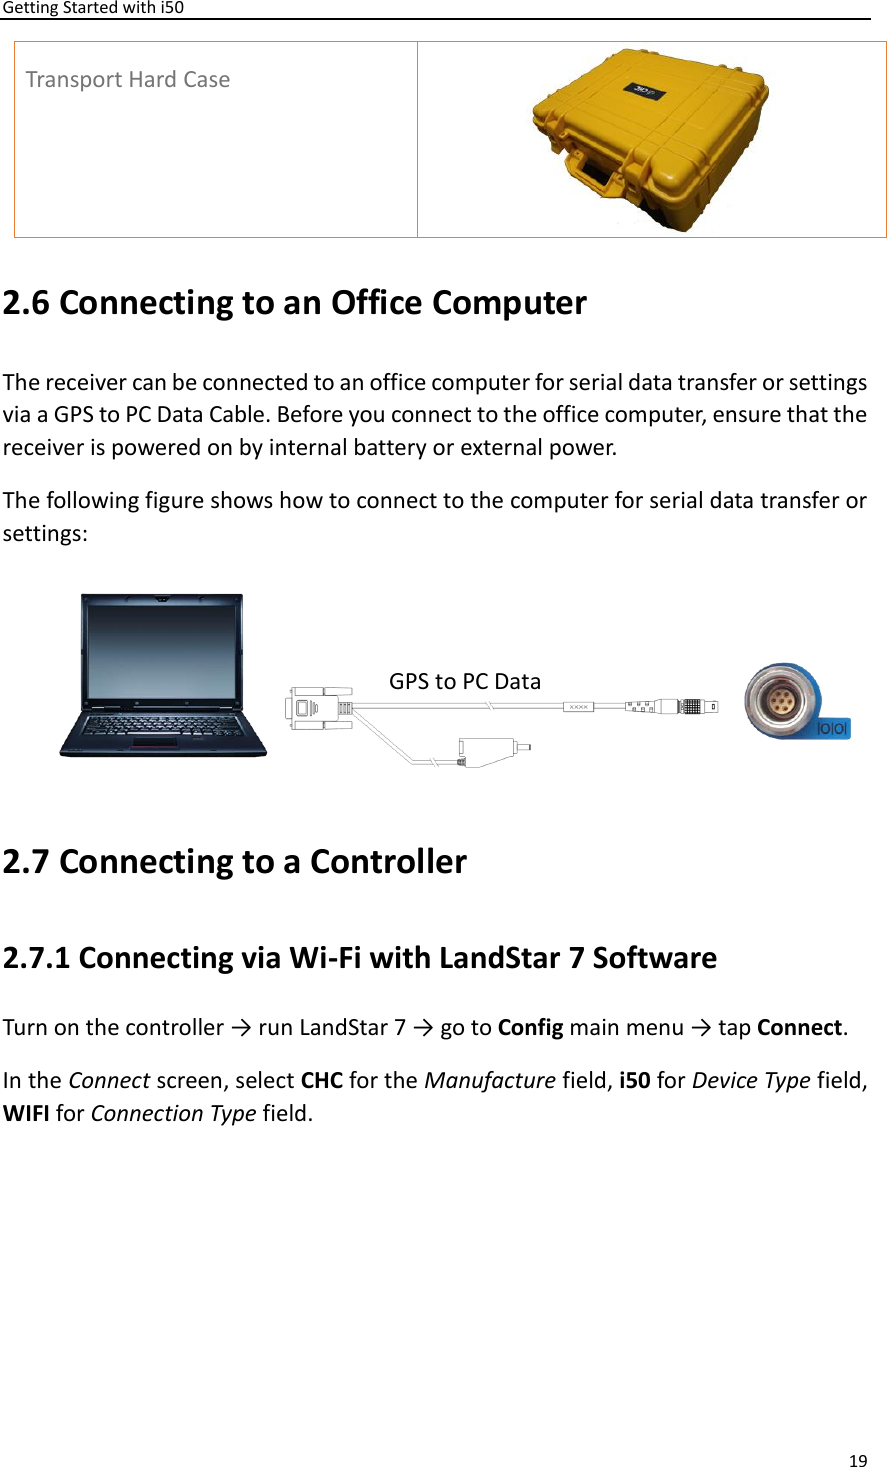 Getting Started with i50 19  Transport Hard Case  2.6 Connecting to an Office Computer The receiver can be connected to an office computer for serial data transfer or settings via a GPS to PC Data Cable. Before you connect to the office computer, ensure that the receiver is powered on by internal battery or external power.   The following figure shows how to connect to the computer for serial data transfer or settings:  2.7 Connecting to a Controller 2.7.1 Connecting via Wi-Fi with LandStar 7 Software Turn on the controller → run LandStar 7 → go to Config main menu → tap Connect.   In the Connect screen, select CHC for the Manufacture field, i50 for Device Type field, WIFI for Connection Type field. GPS to PC Data Cable 